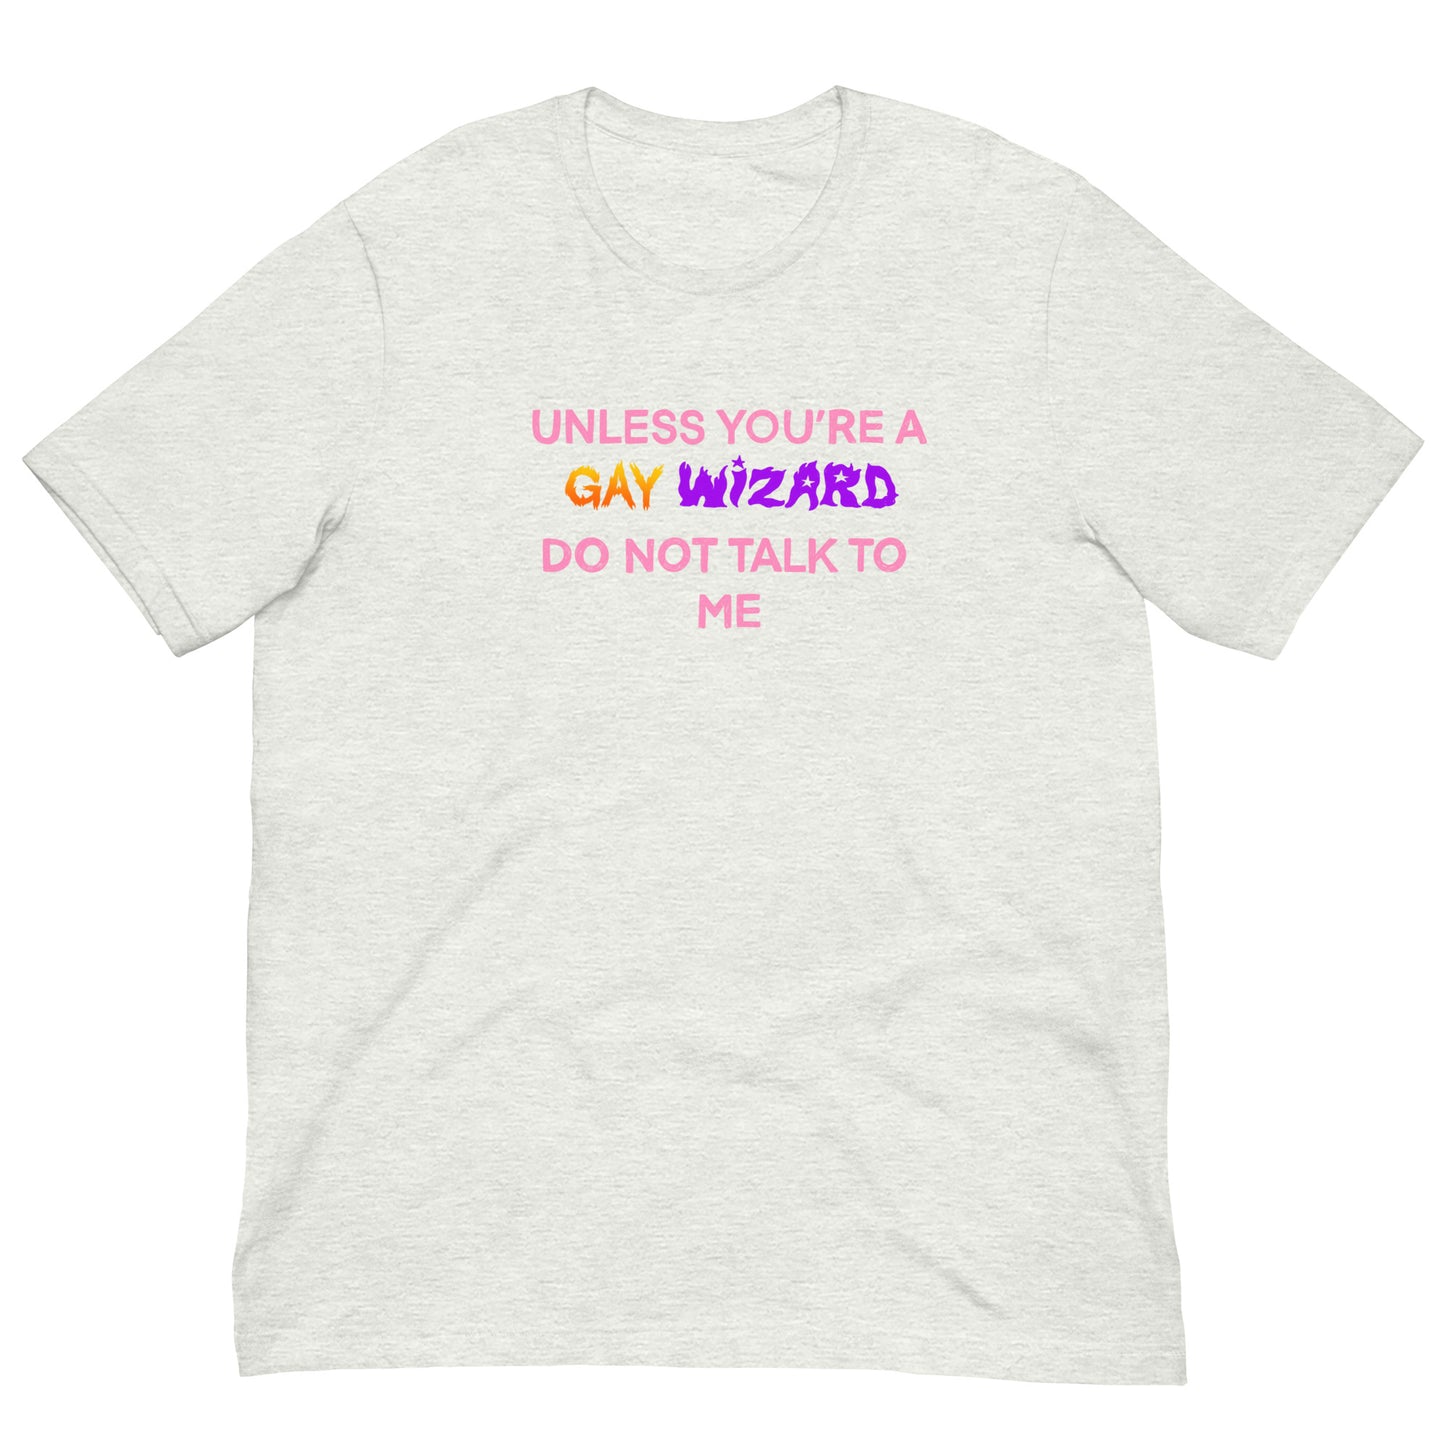 Unless You’re A Gay Wizard Do Not Talk To Me Tee